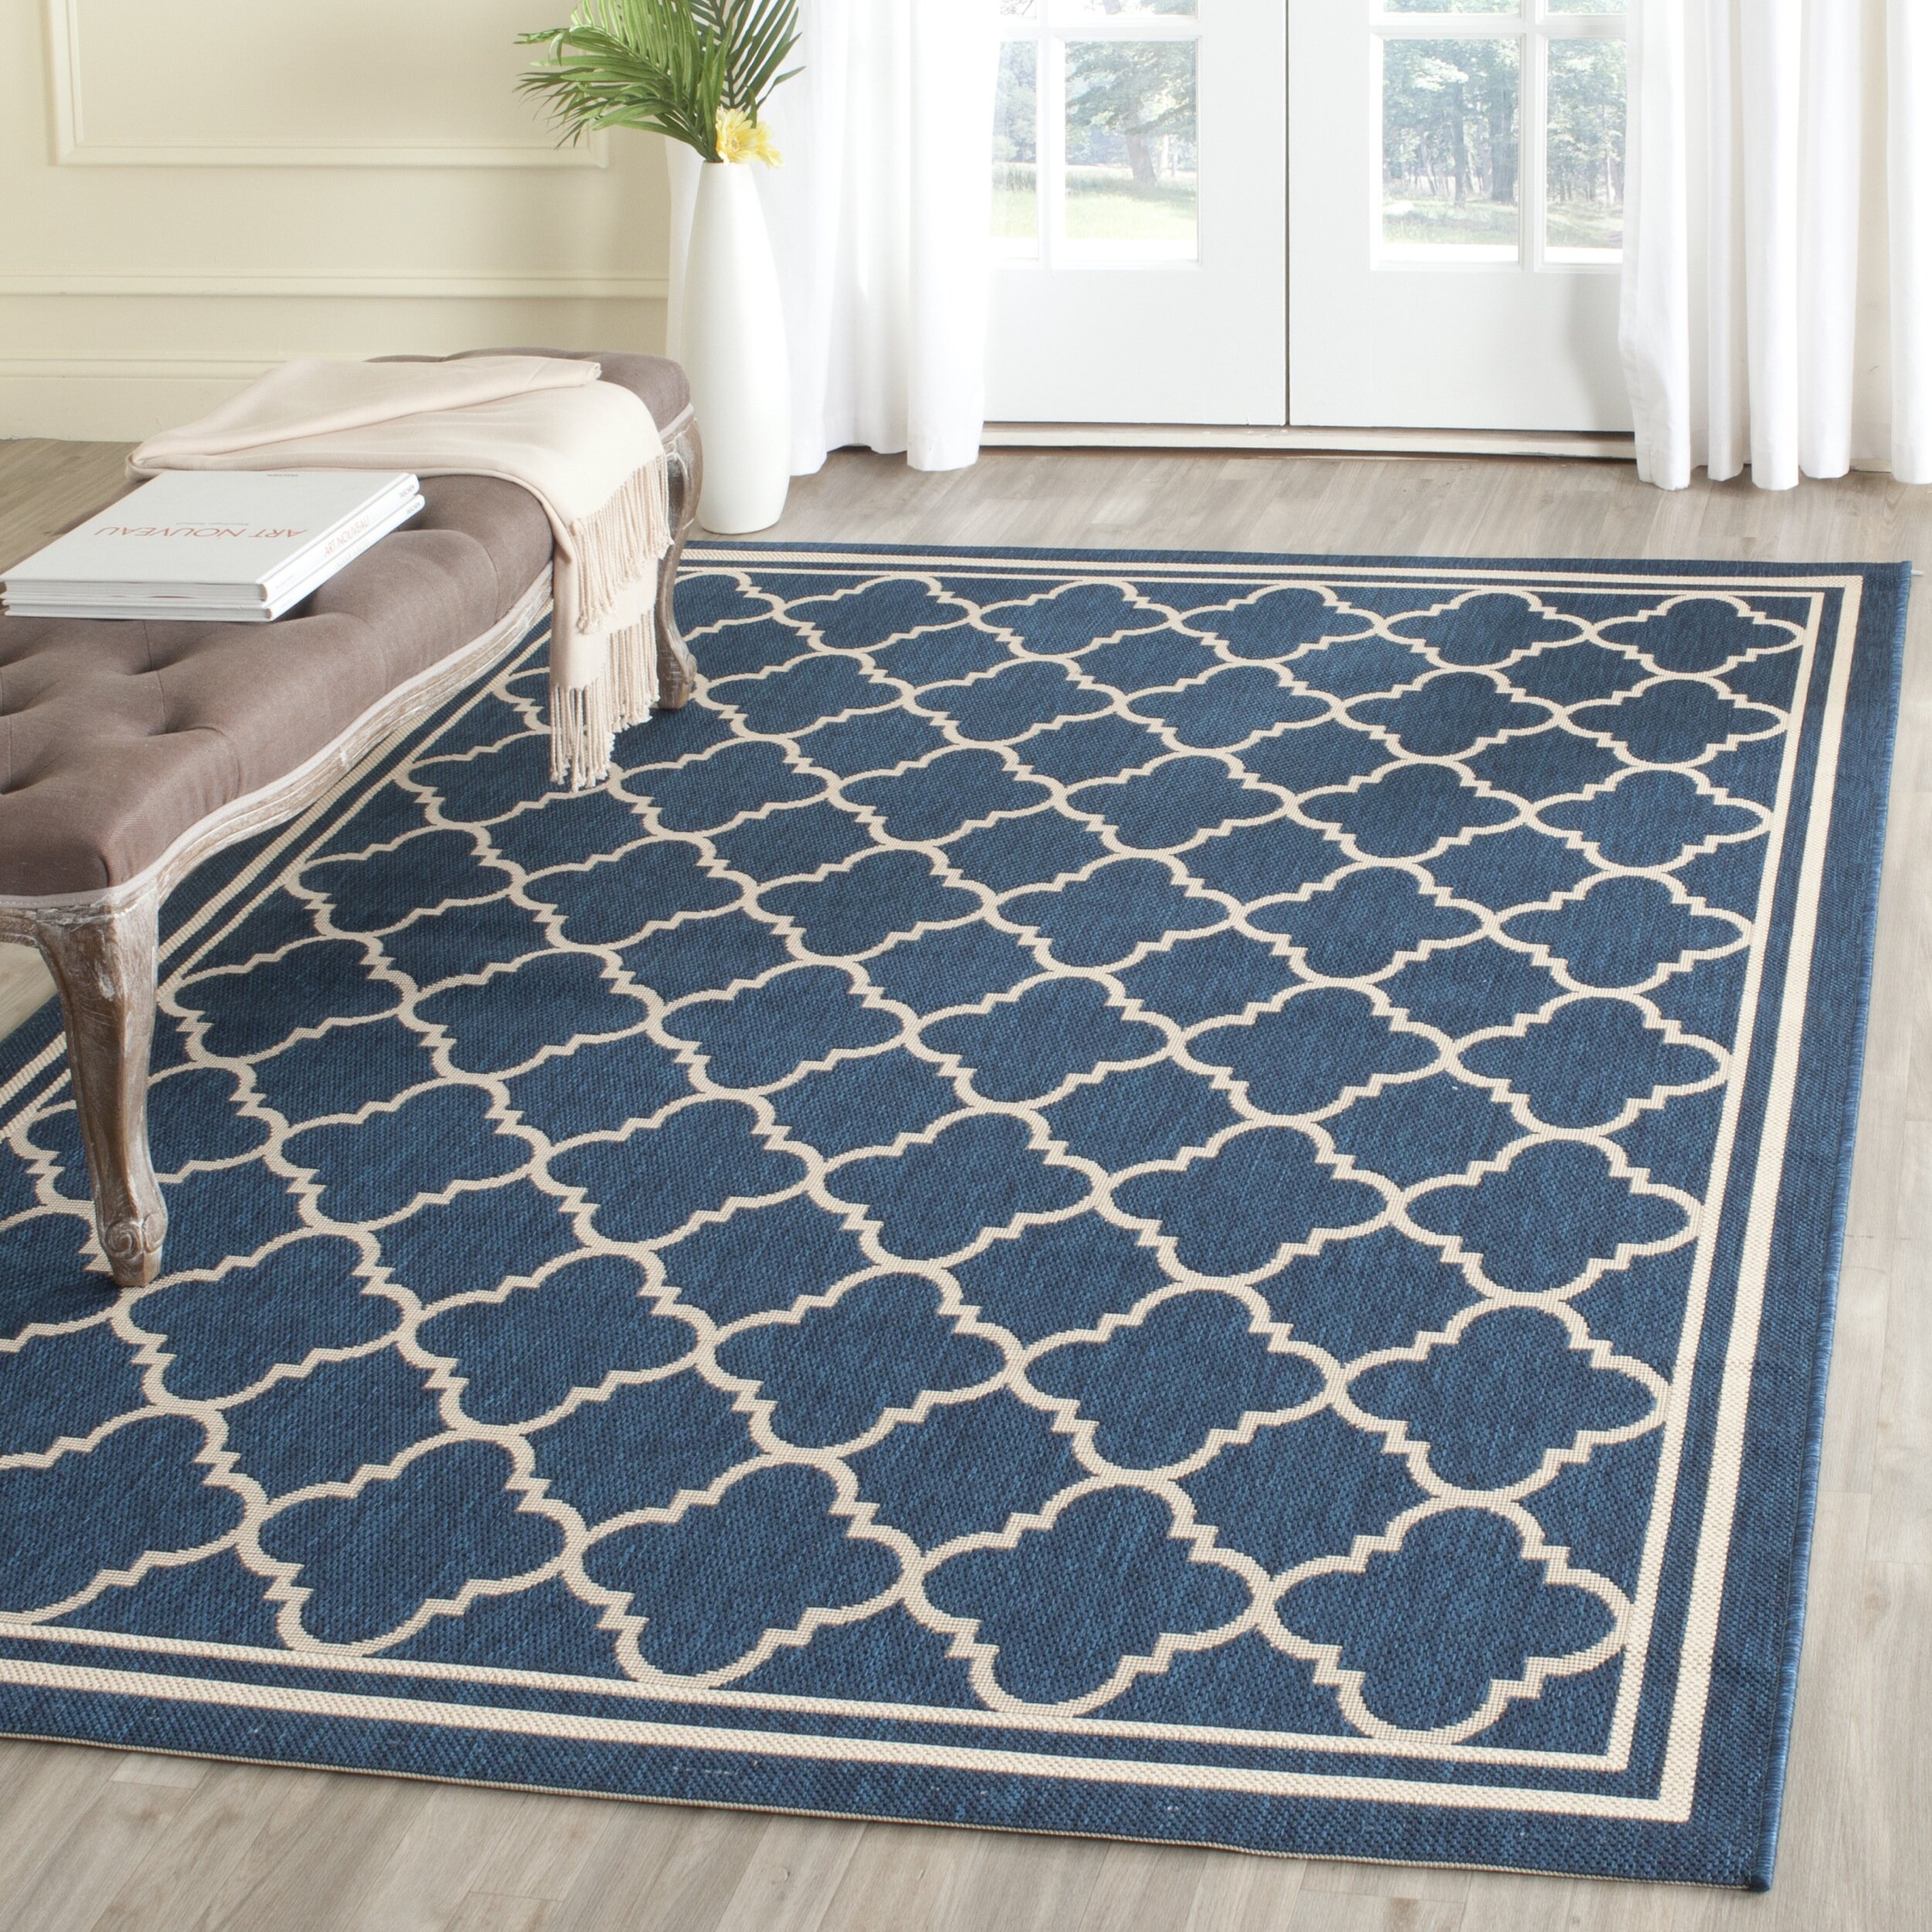 Safavieh Courtyard Grantham Blue Ivory Outdoor Area Rug CY6918 268 